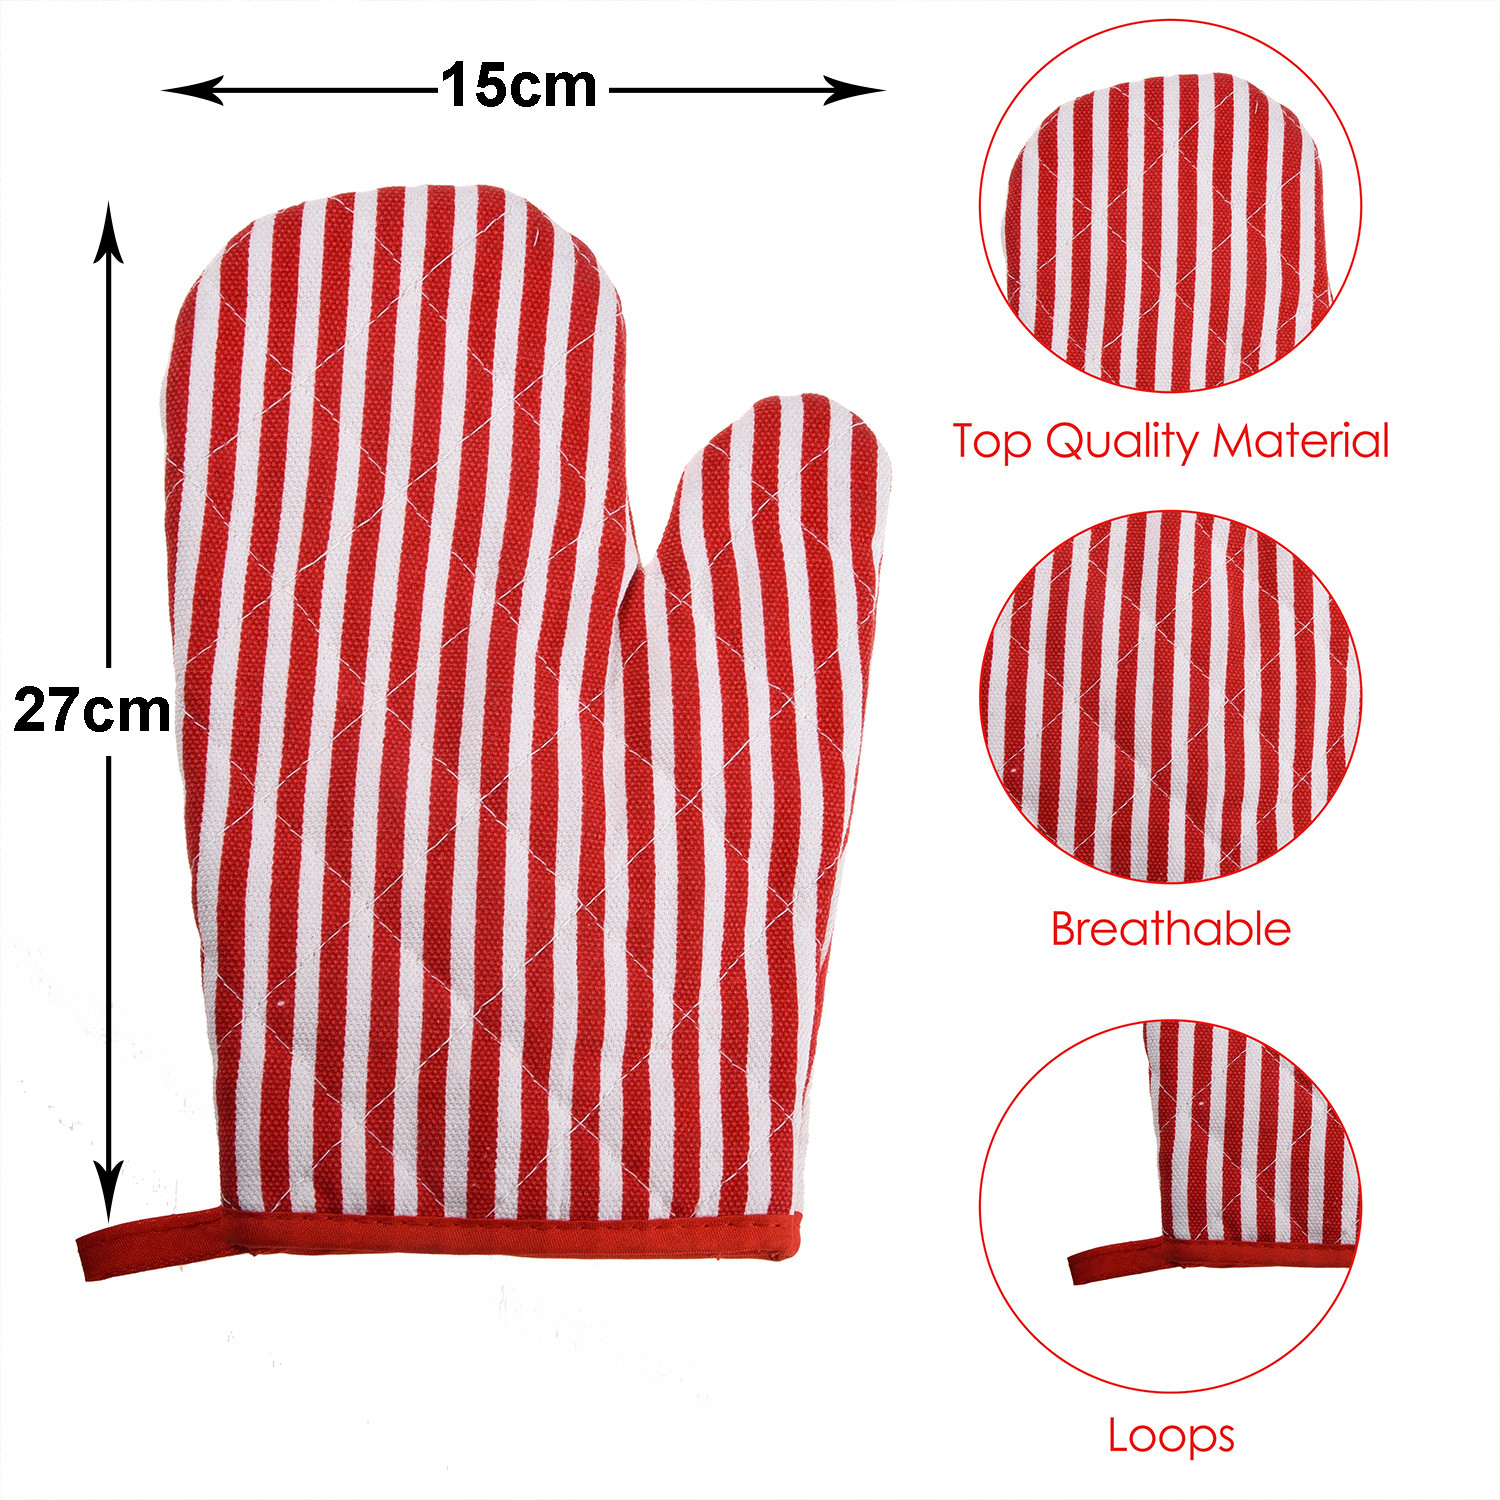 Kuber Industries Oven Mitts|Cotton Microwave Oven Gloves|Lining Print Hanging Loop Kitchen Oven|Heat Resistant|Microwave Gloves For Kitchen|1 Pair (Red)